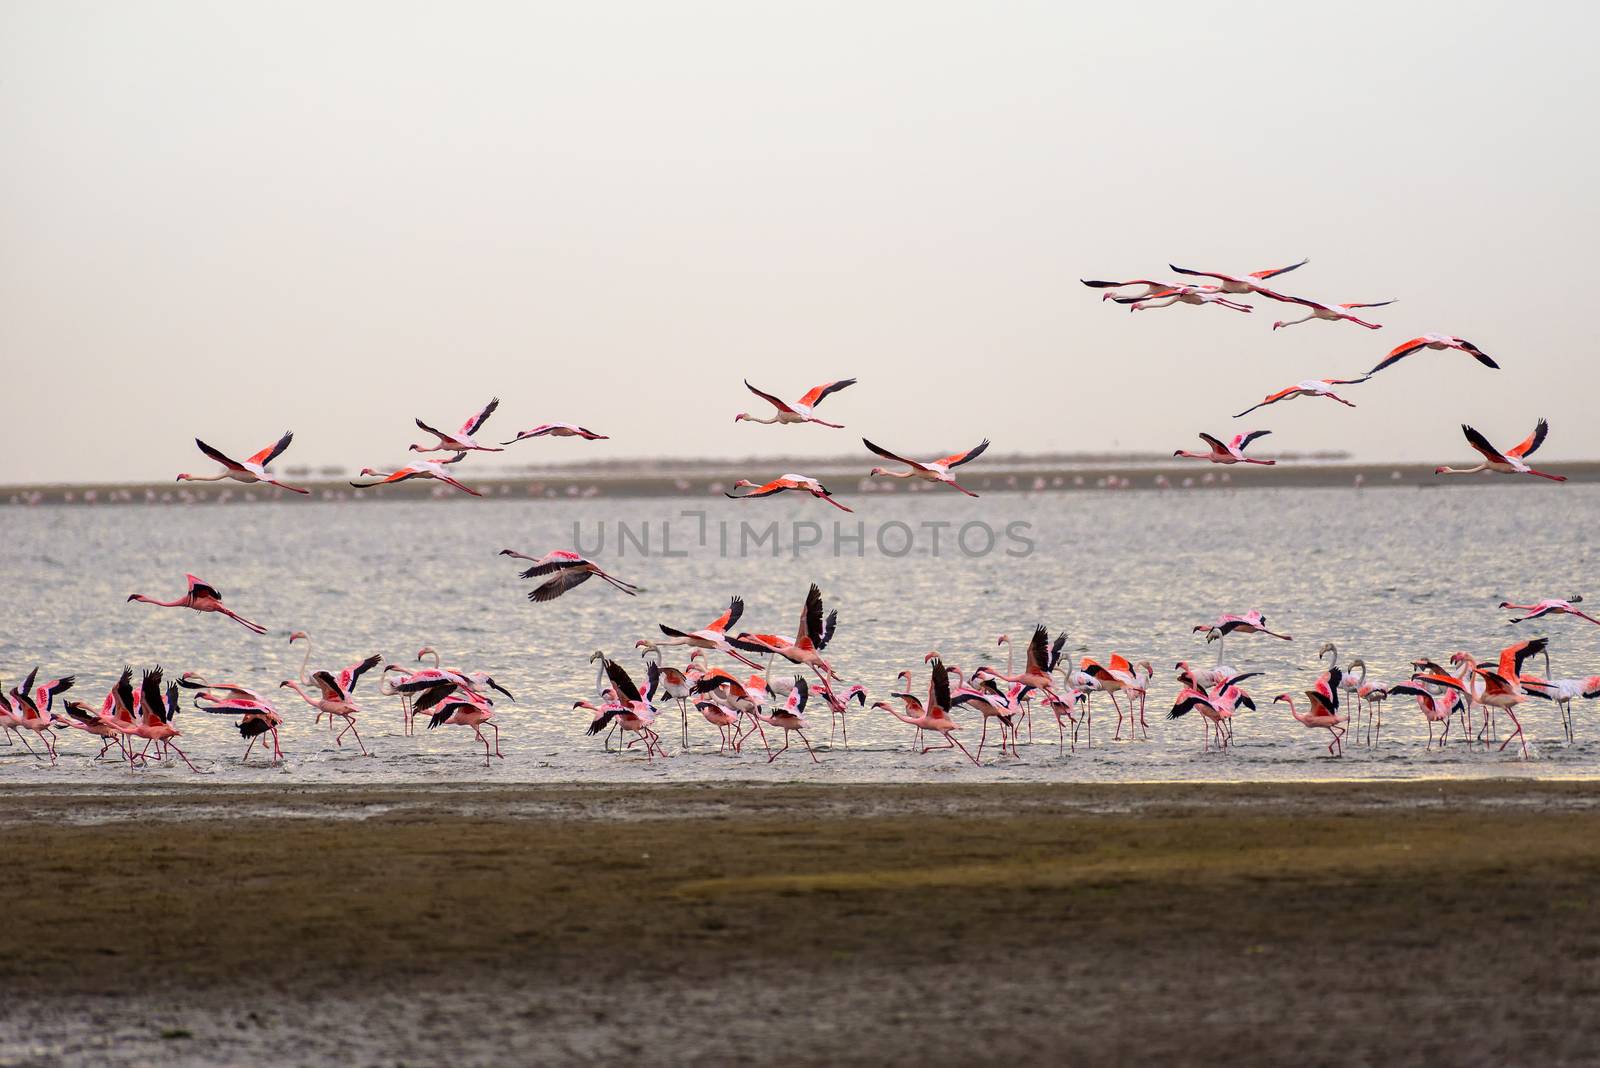 A large flock of pink flamingos in flight over the Atlantic Ocean at Walvis Bay, Namibia.